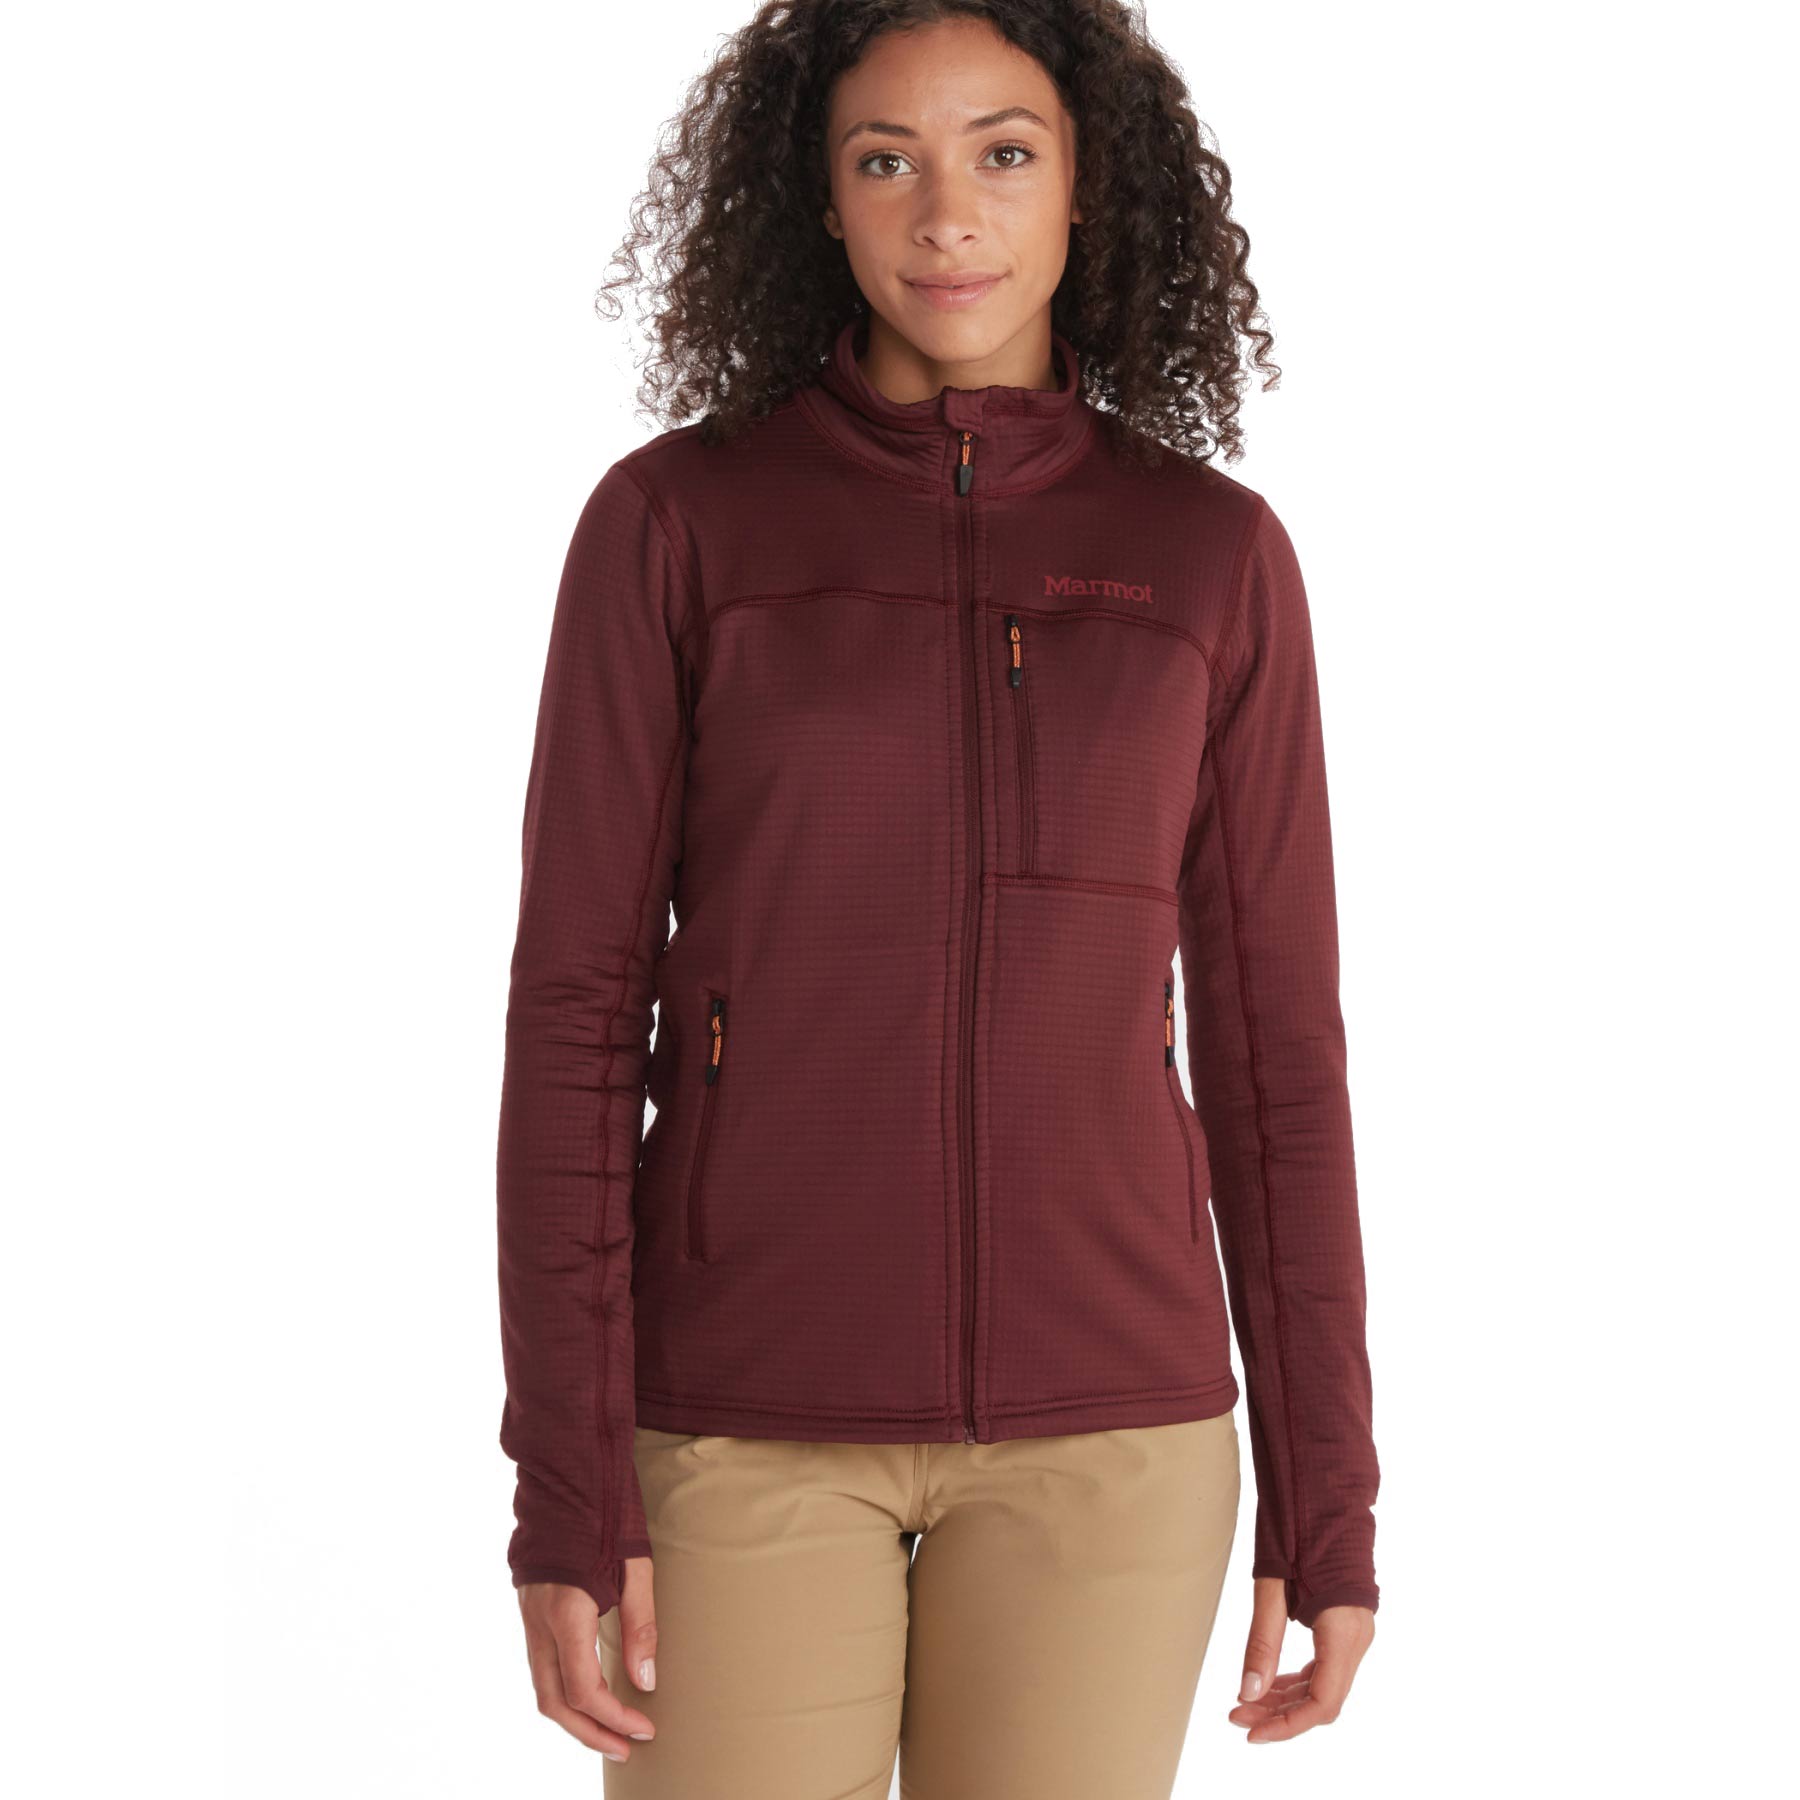 Picture of Marmot Women Preon Jacket - port royal